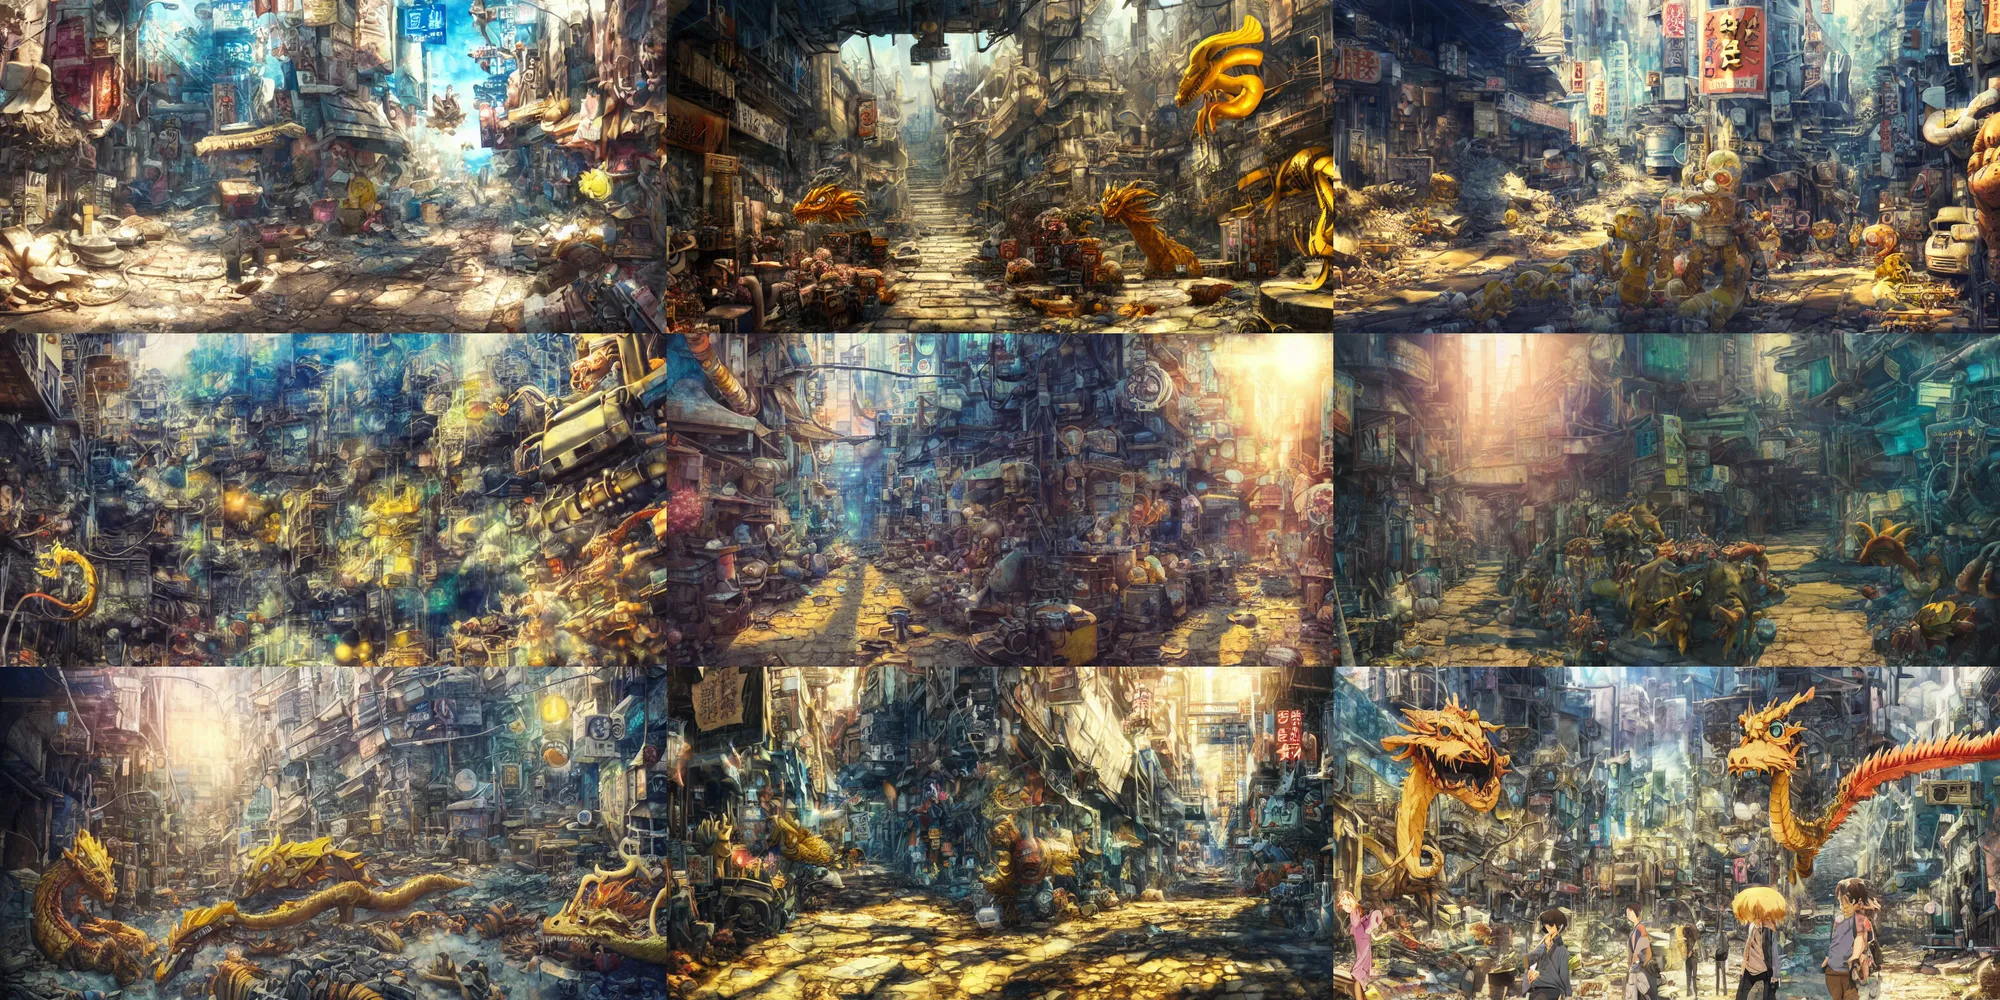 Prompt: incredible anime movie scene, watercolor, underwater market, narrow path, coral, harsh bloom lighting, rim light, abandoned city, paper texture, movie scene, caustics shadows, deserted shinjuku junk town, old pawn shop, bright sun ground, pipes, yellow dragon head festival, robot monster in background